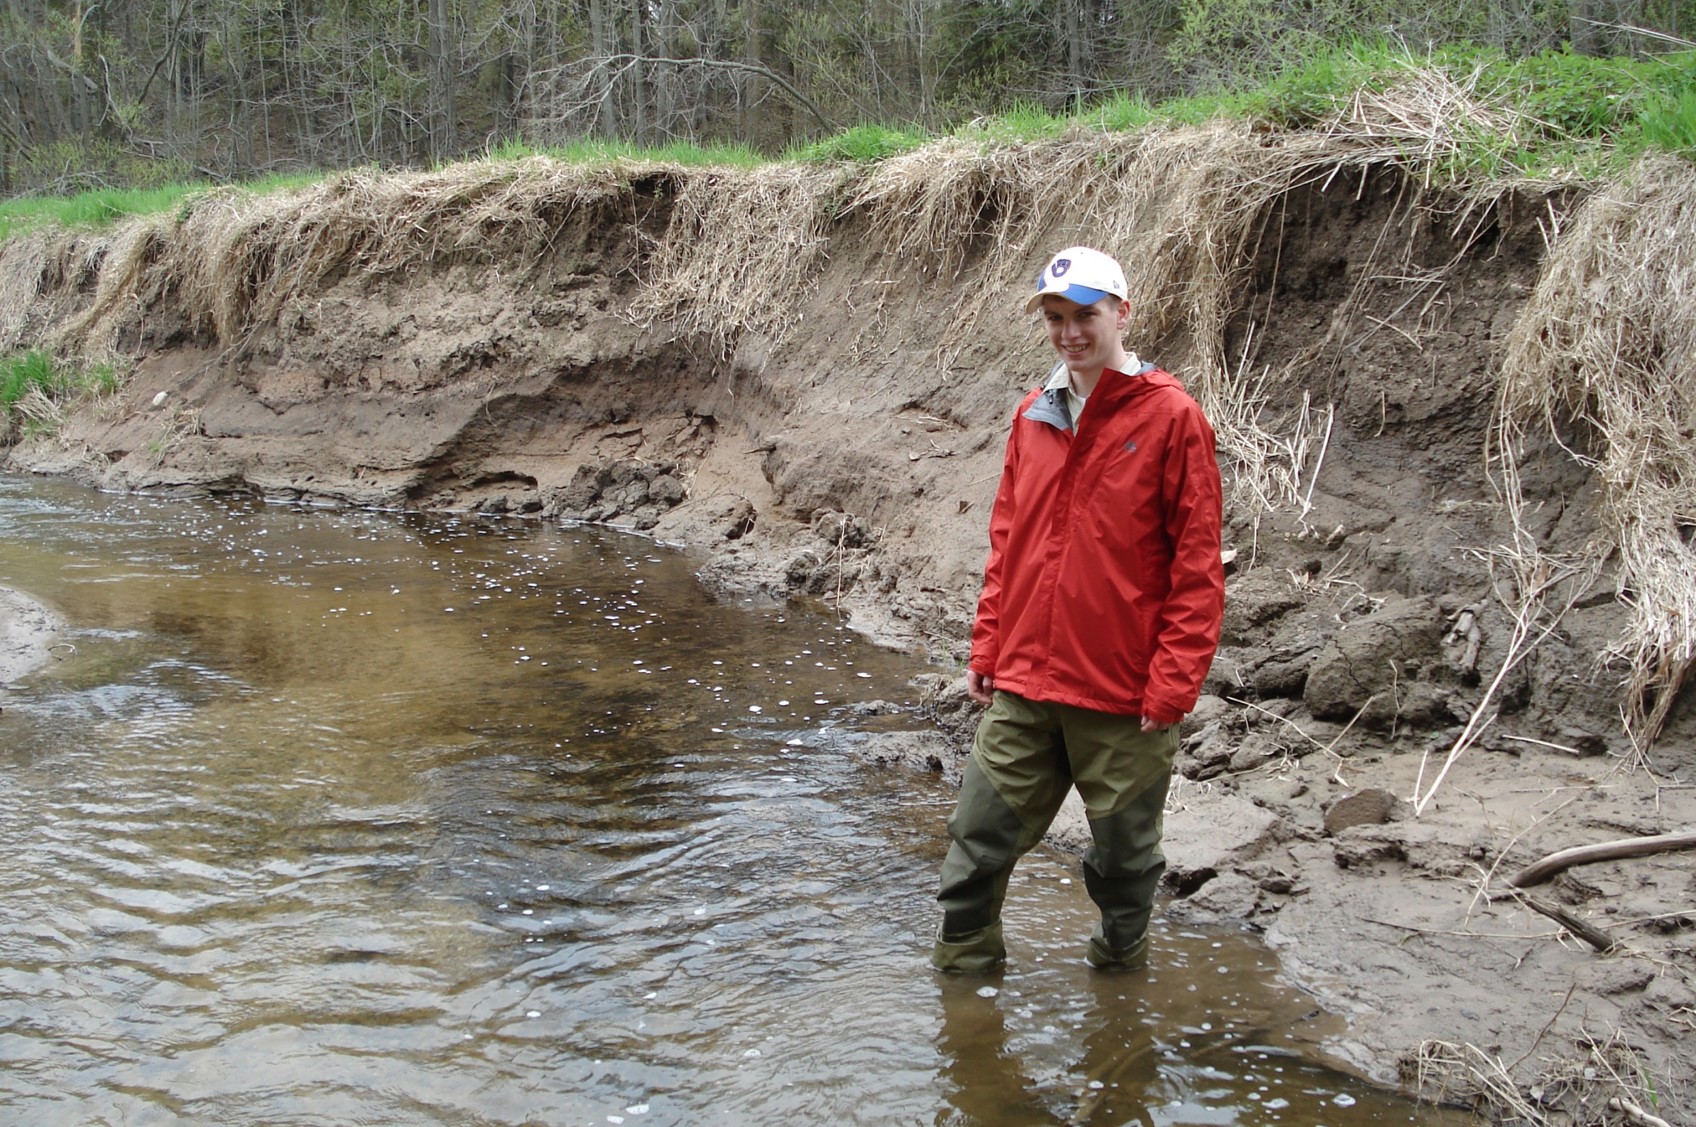 Post-dam removal: poor conditions when impounded sediments are not removed